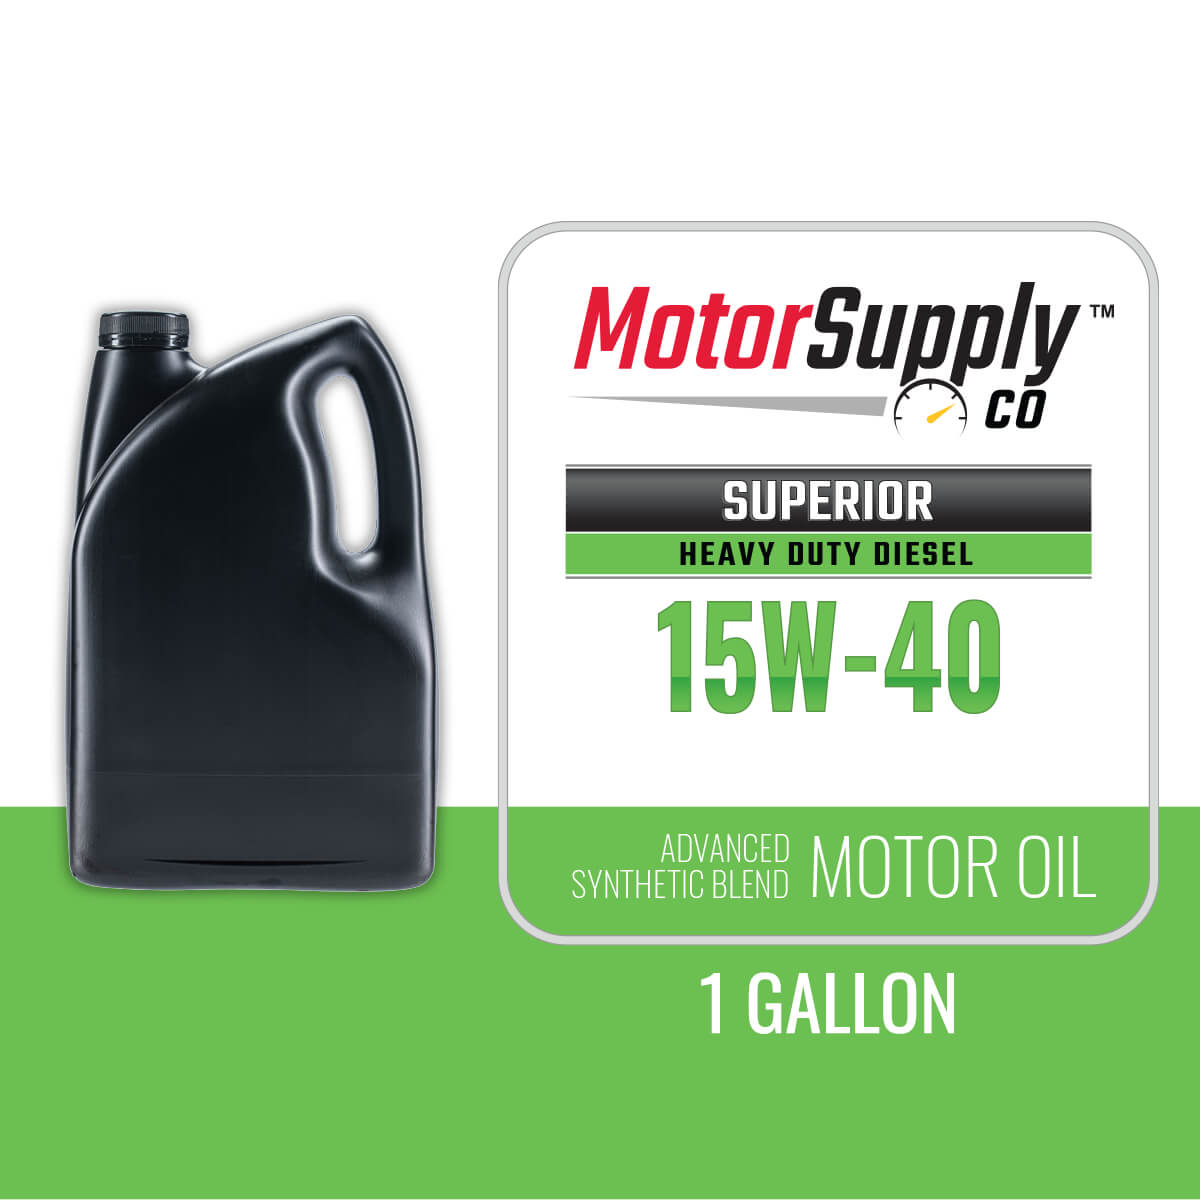 Motor Supply Co Superior Synthetic Blend HD Engine Oil CK4 Diesel 15W40 1G Product Image